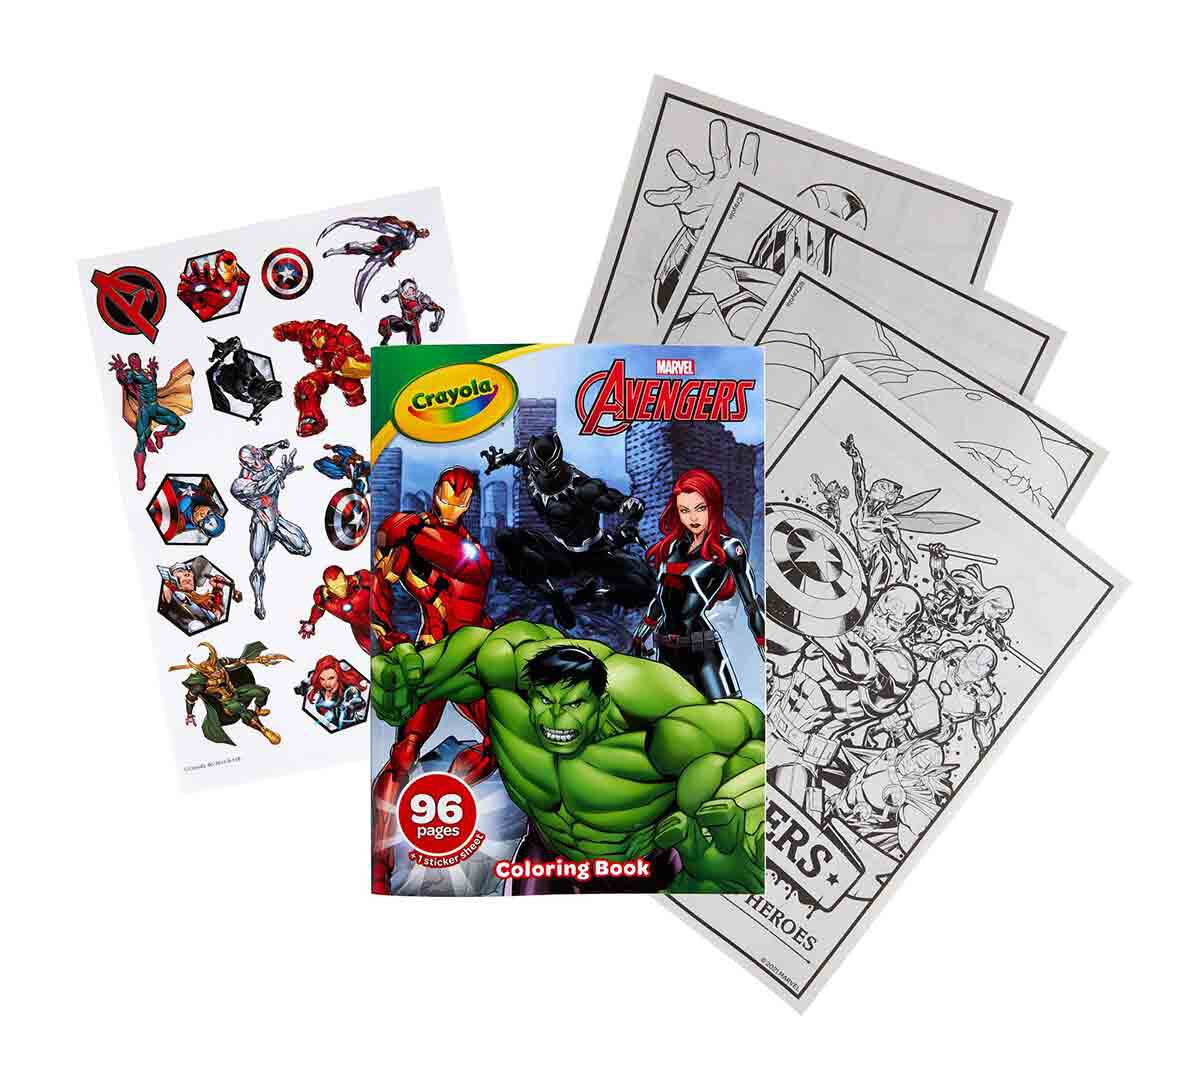 Avengers: Age of Ultron Drawing by Kitslam | Full Video on Y… | Flickr